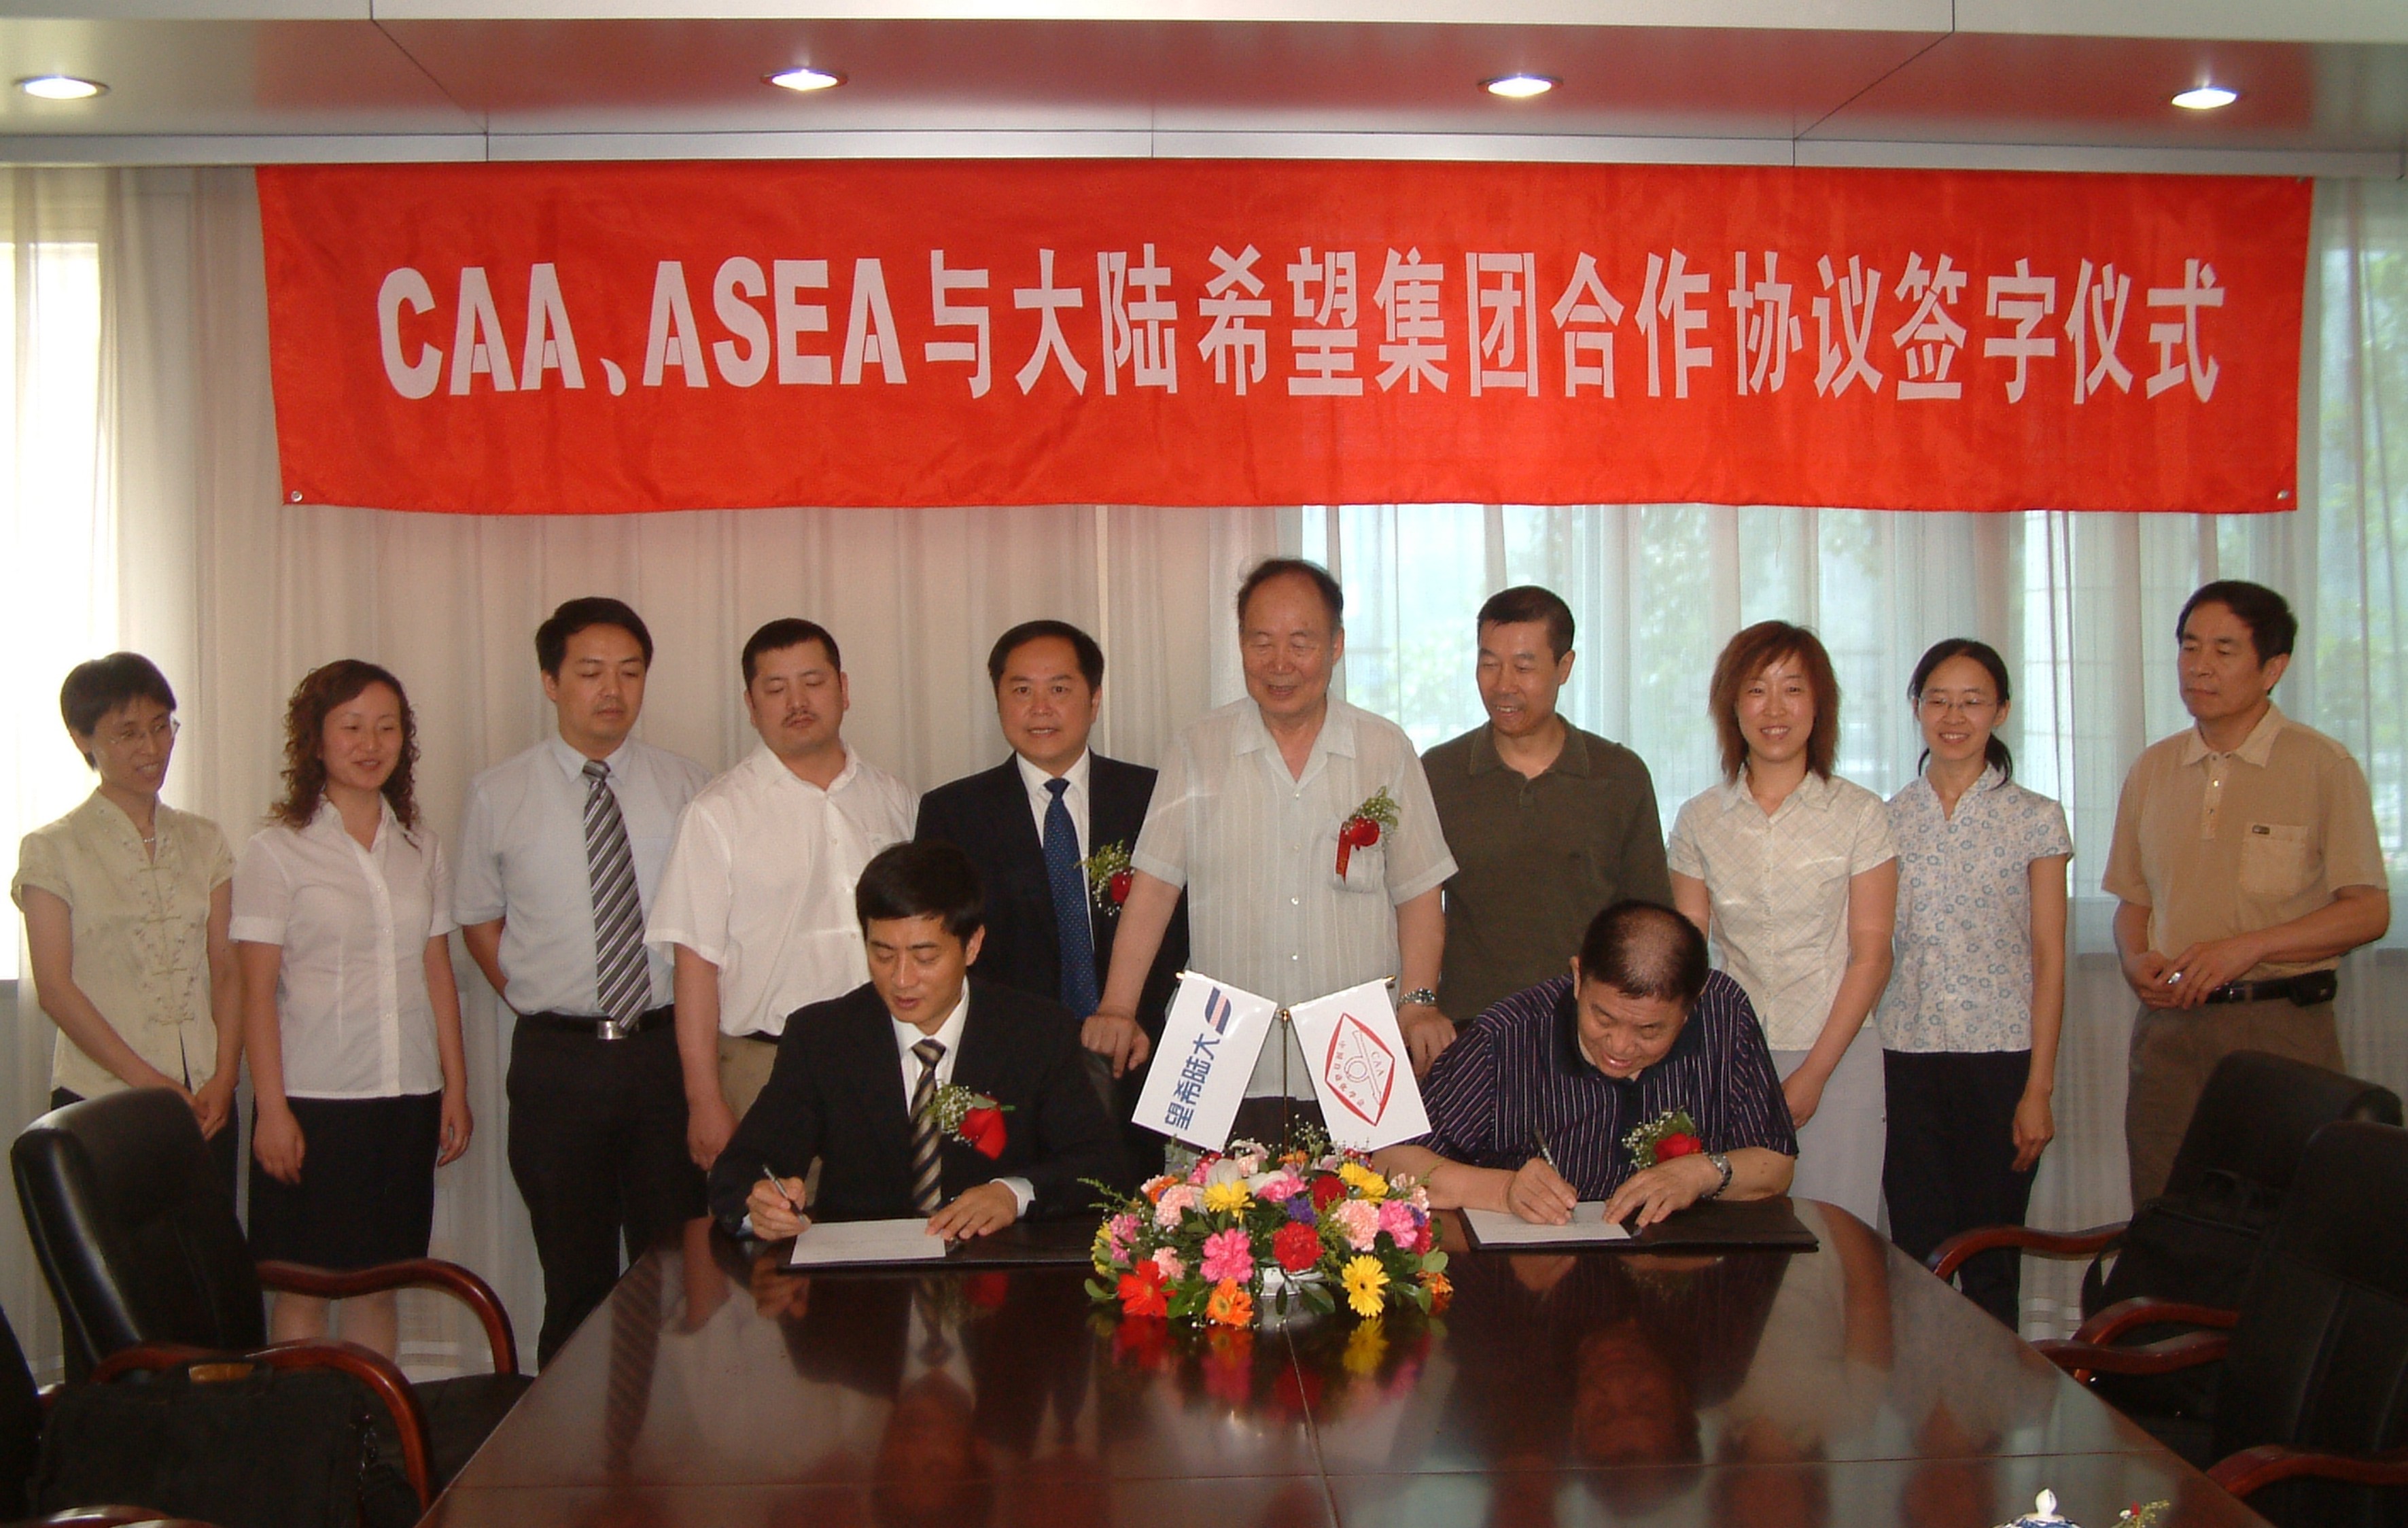 A cooperation agreement signing ceremony with the CAA ASEA